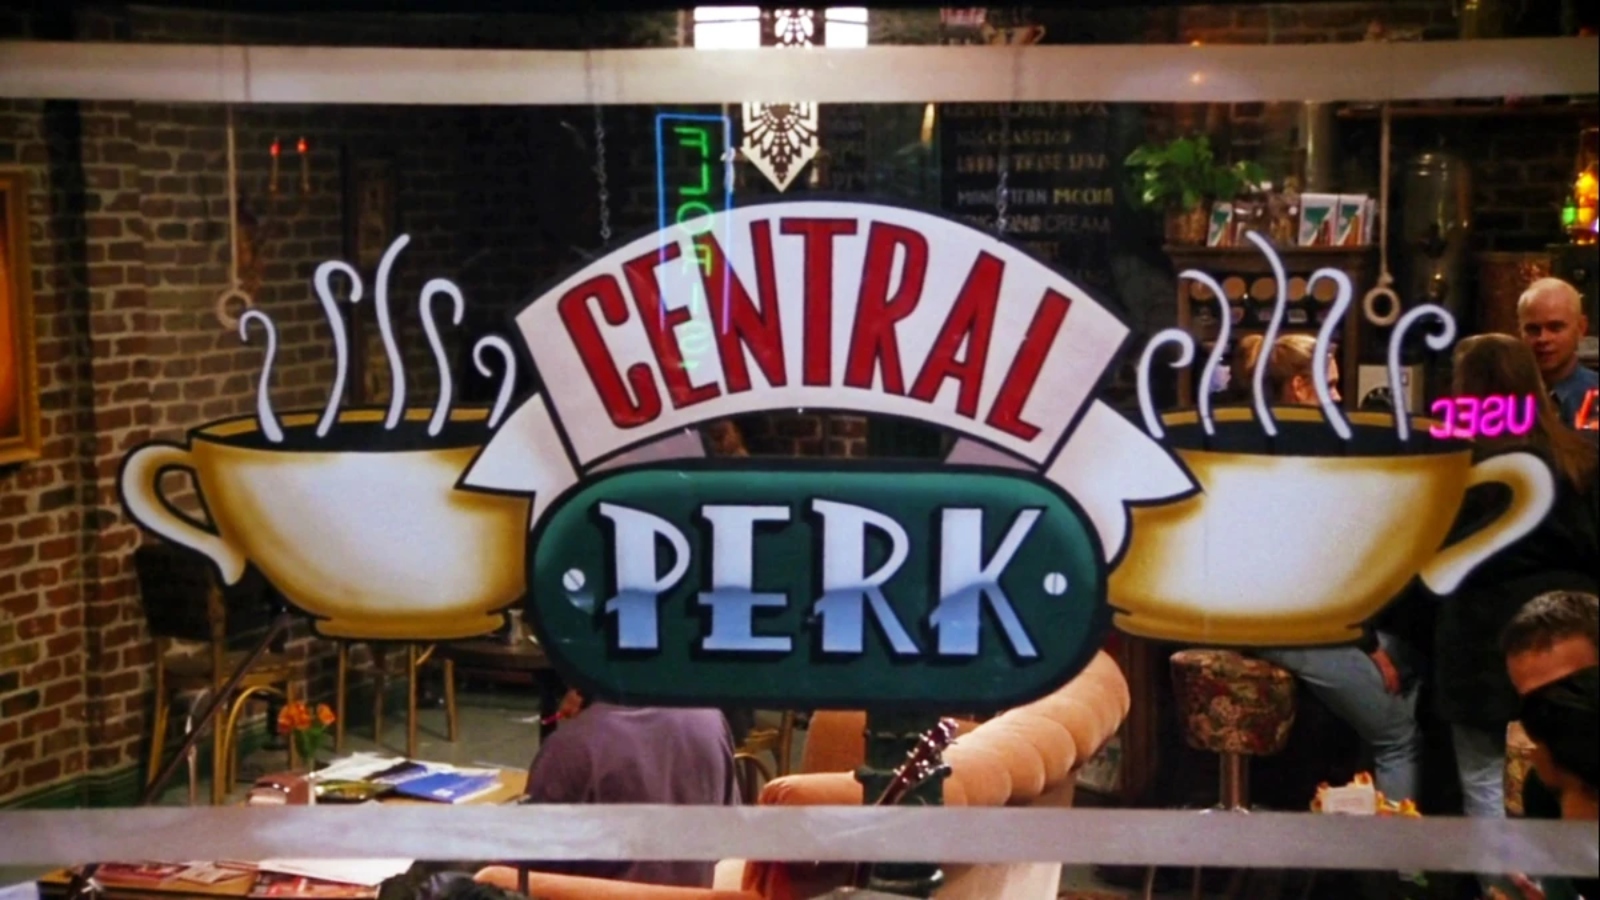 Central Perk coffeehouse from Friends